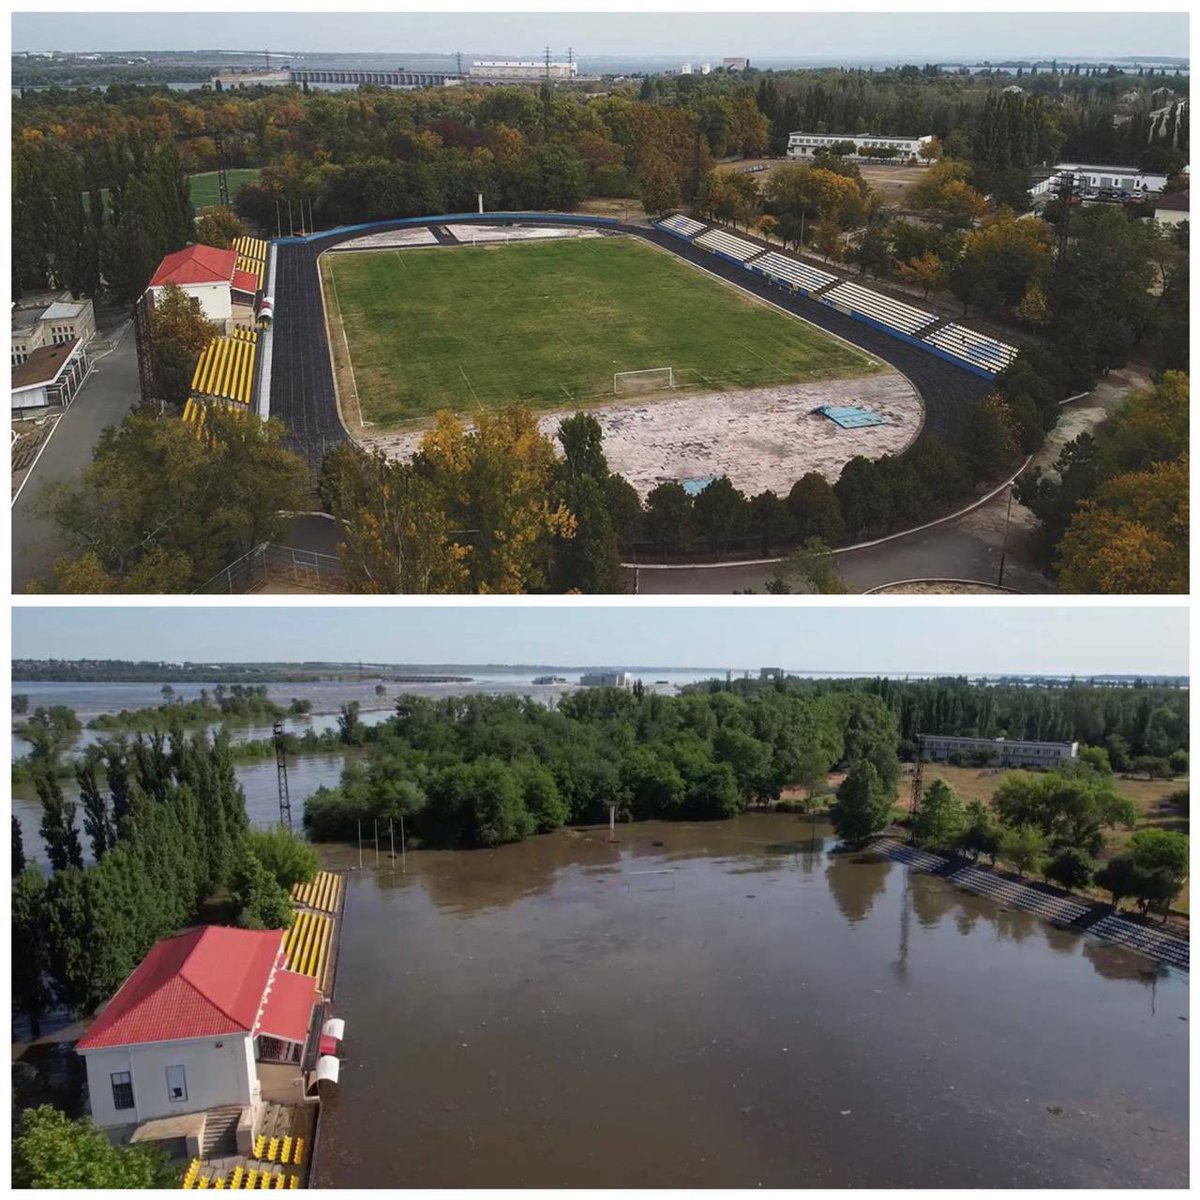 Stadium “Energy” in Nova Kakhovka already went under water in the afternoon. #banrussiansport #RussianWarCrimes